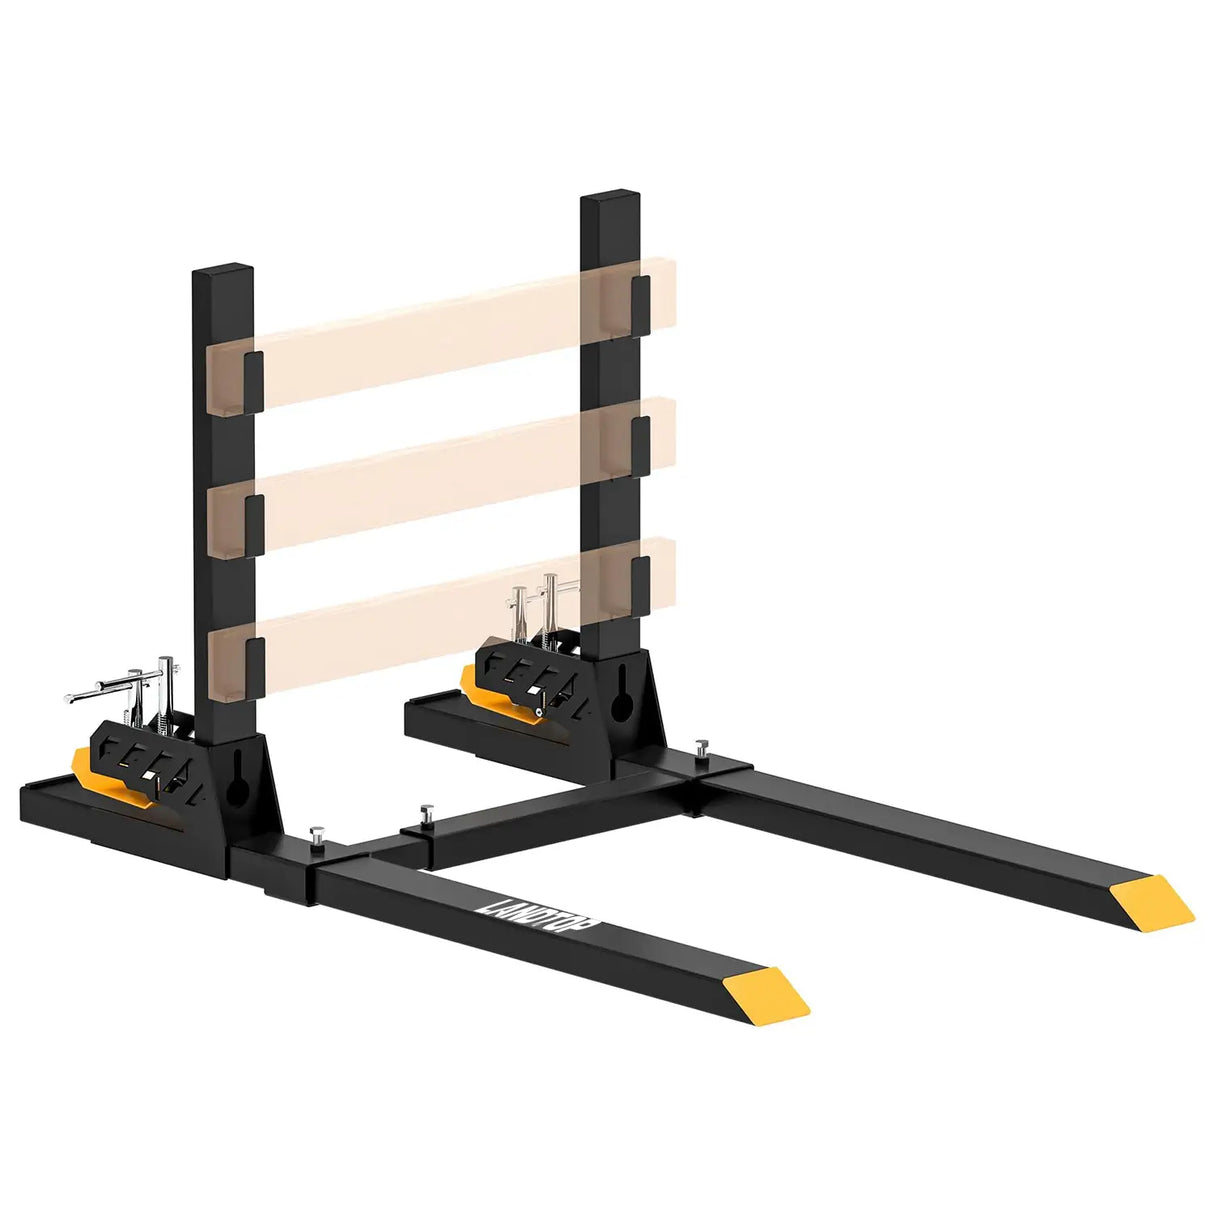 60" 4000 lbs Heavy Duty Clamp-on Pallet Forks with Anti-roll Bar, Tractor Attachment with Adjustable Stabilizer Bar for Tractor Bucket Loader Skid Steer